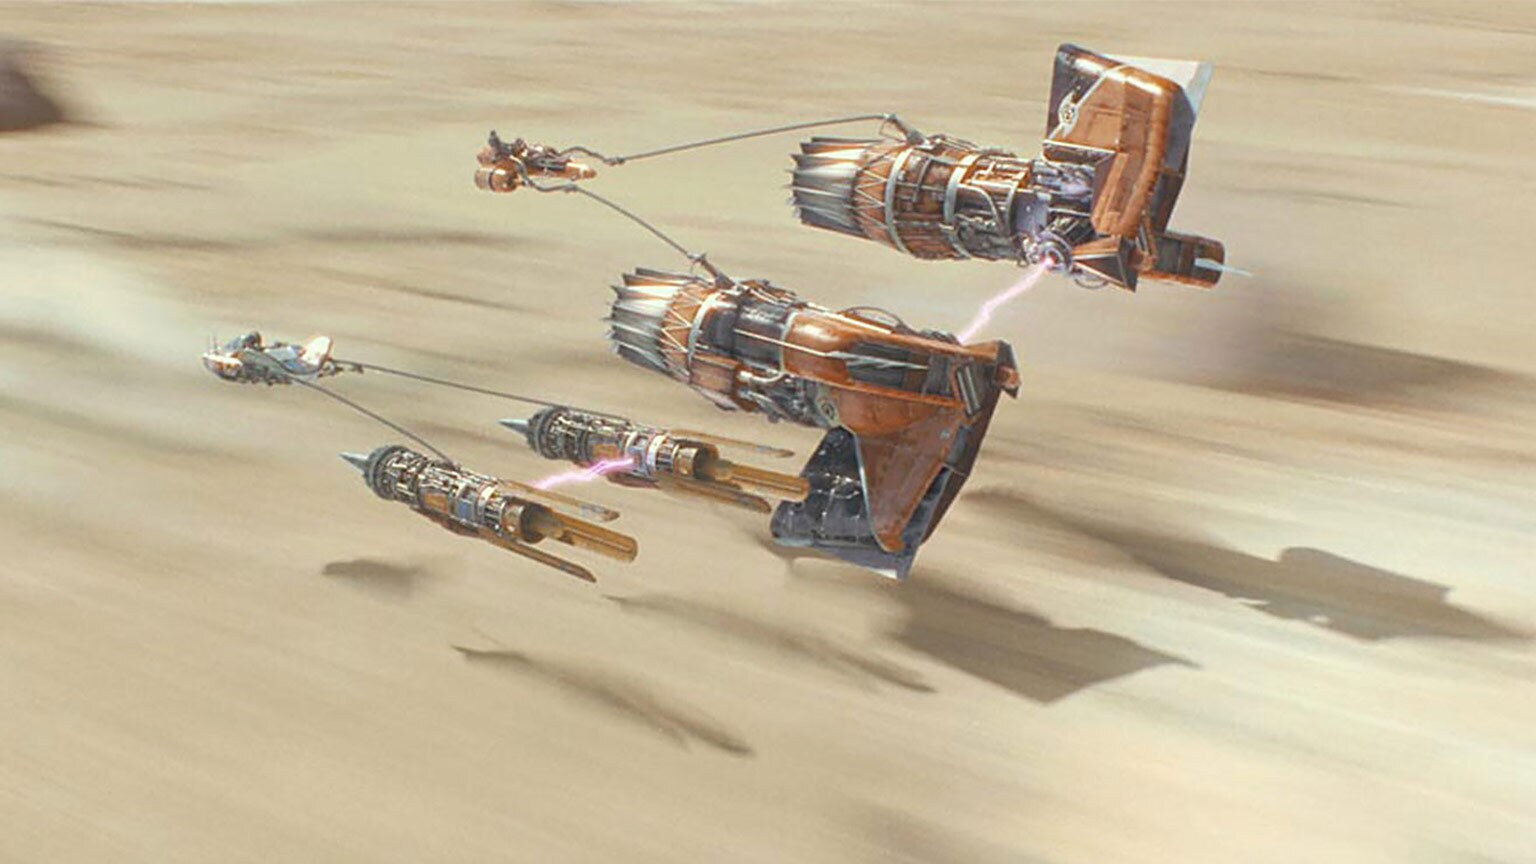 Poll: Which Podracer is the Coolest - Anakin's or Sebulba's?